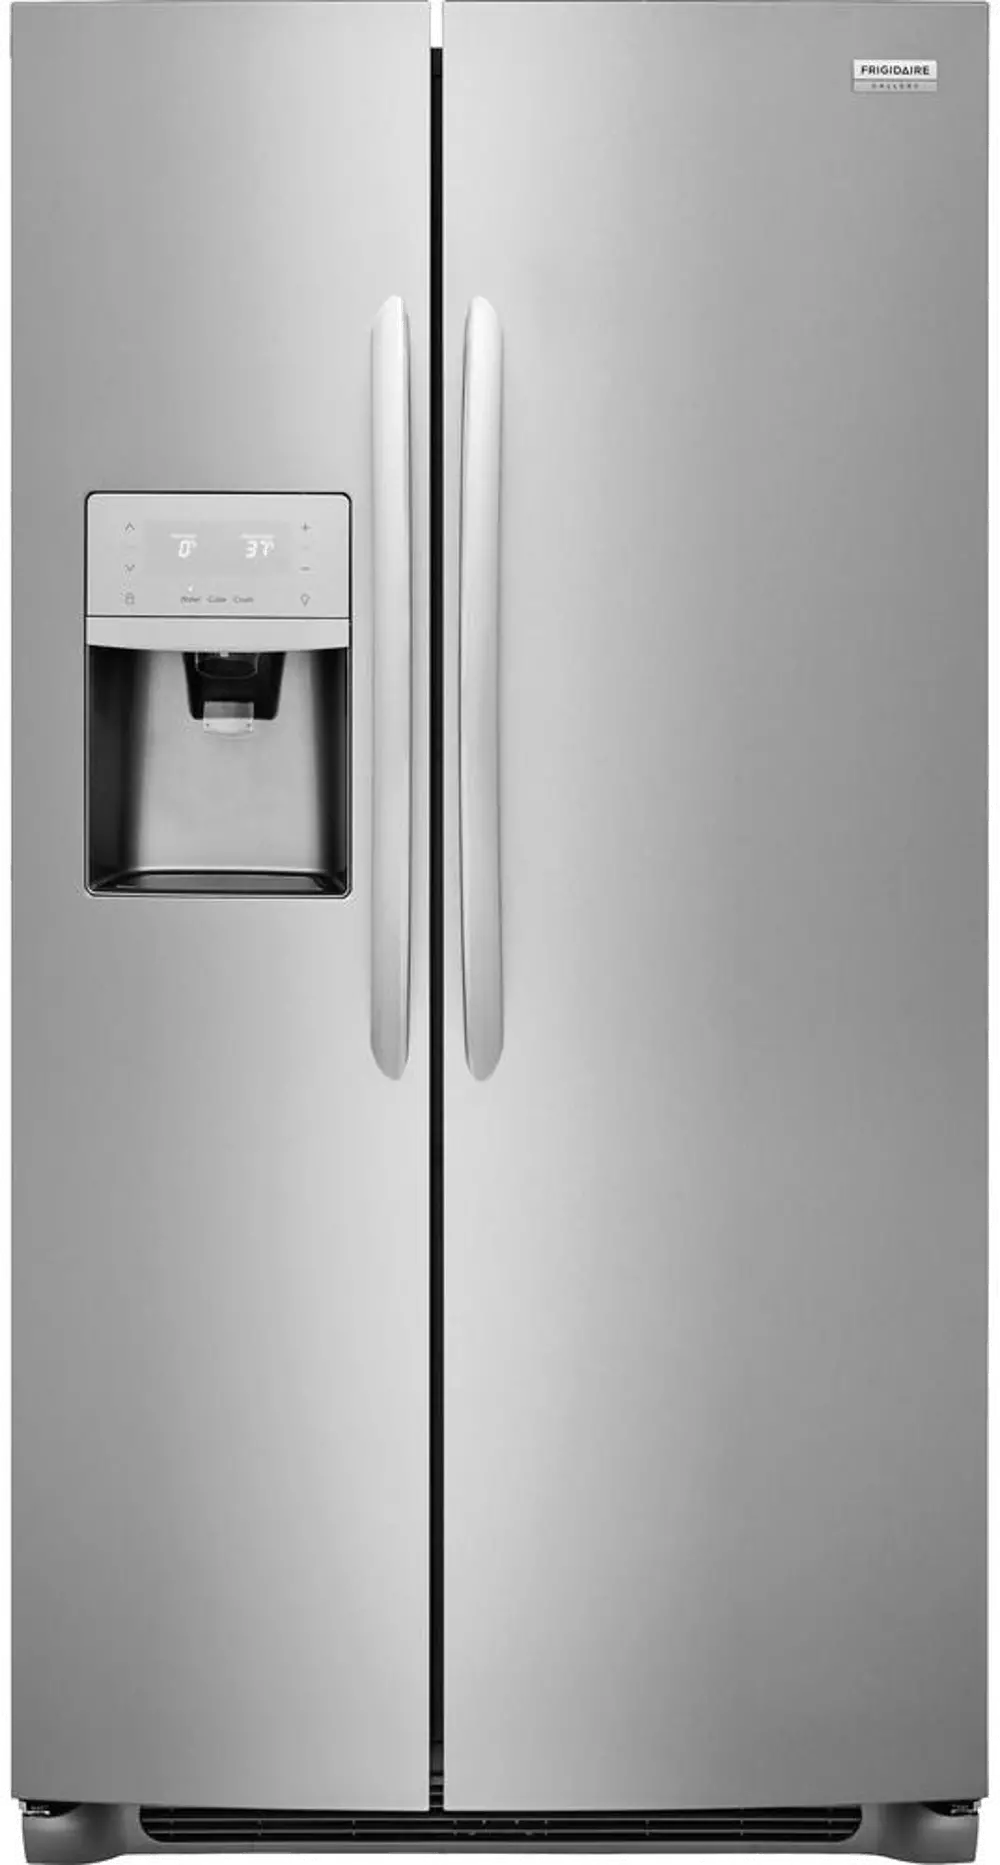 FGSC2335TF Frigidaire Gallery Counter Depth Side by Side Refrigerator - 22.1 cu. ft., 36 Inch Stainless Steel-1